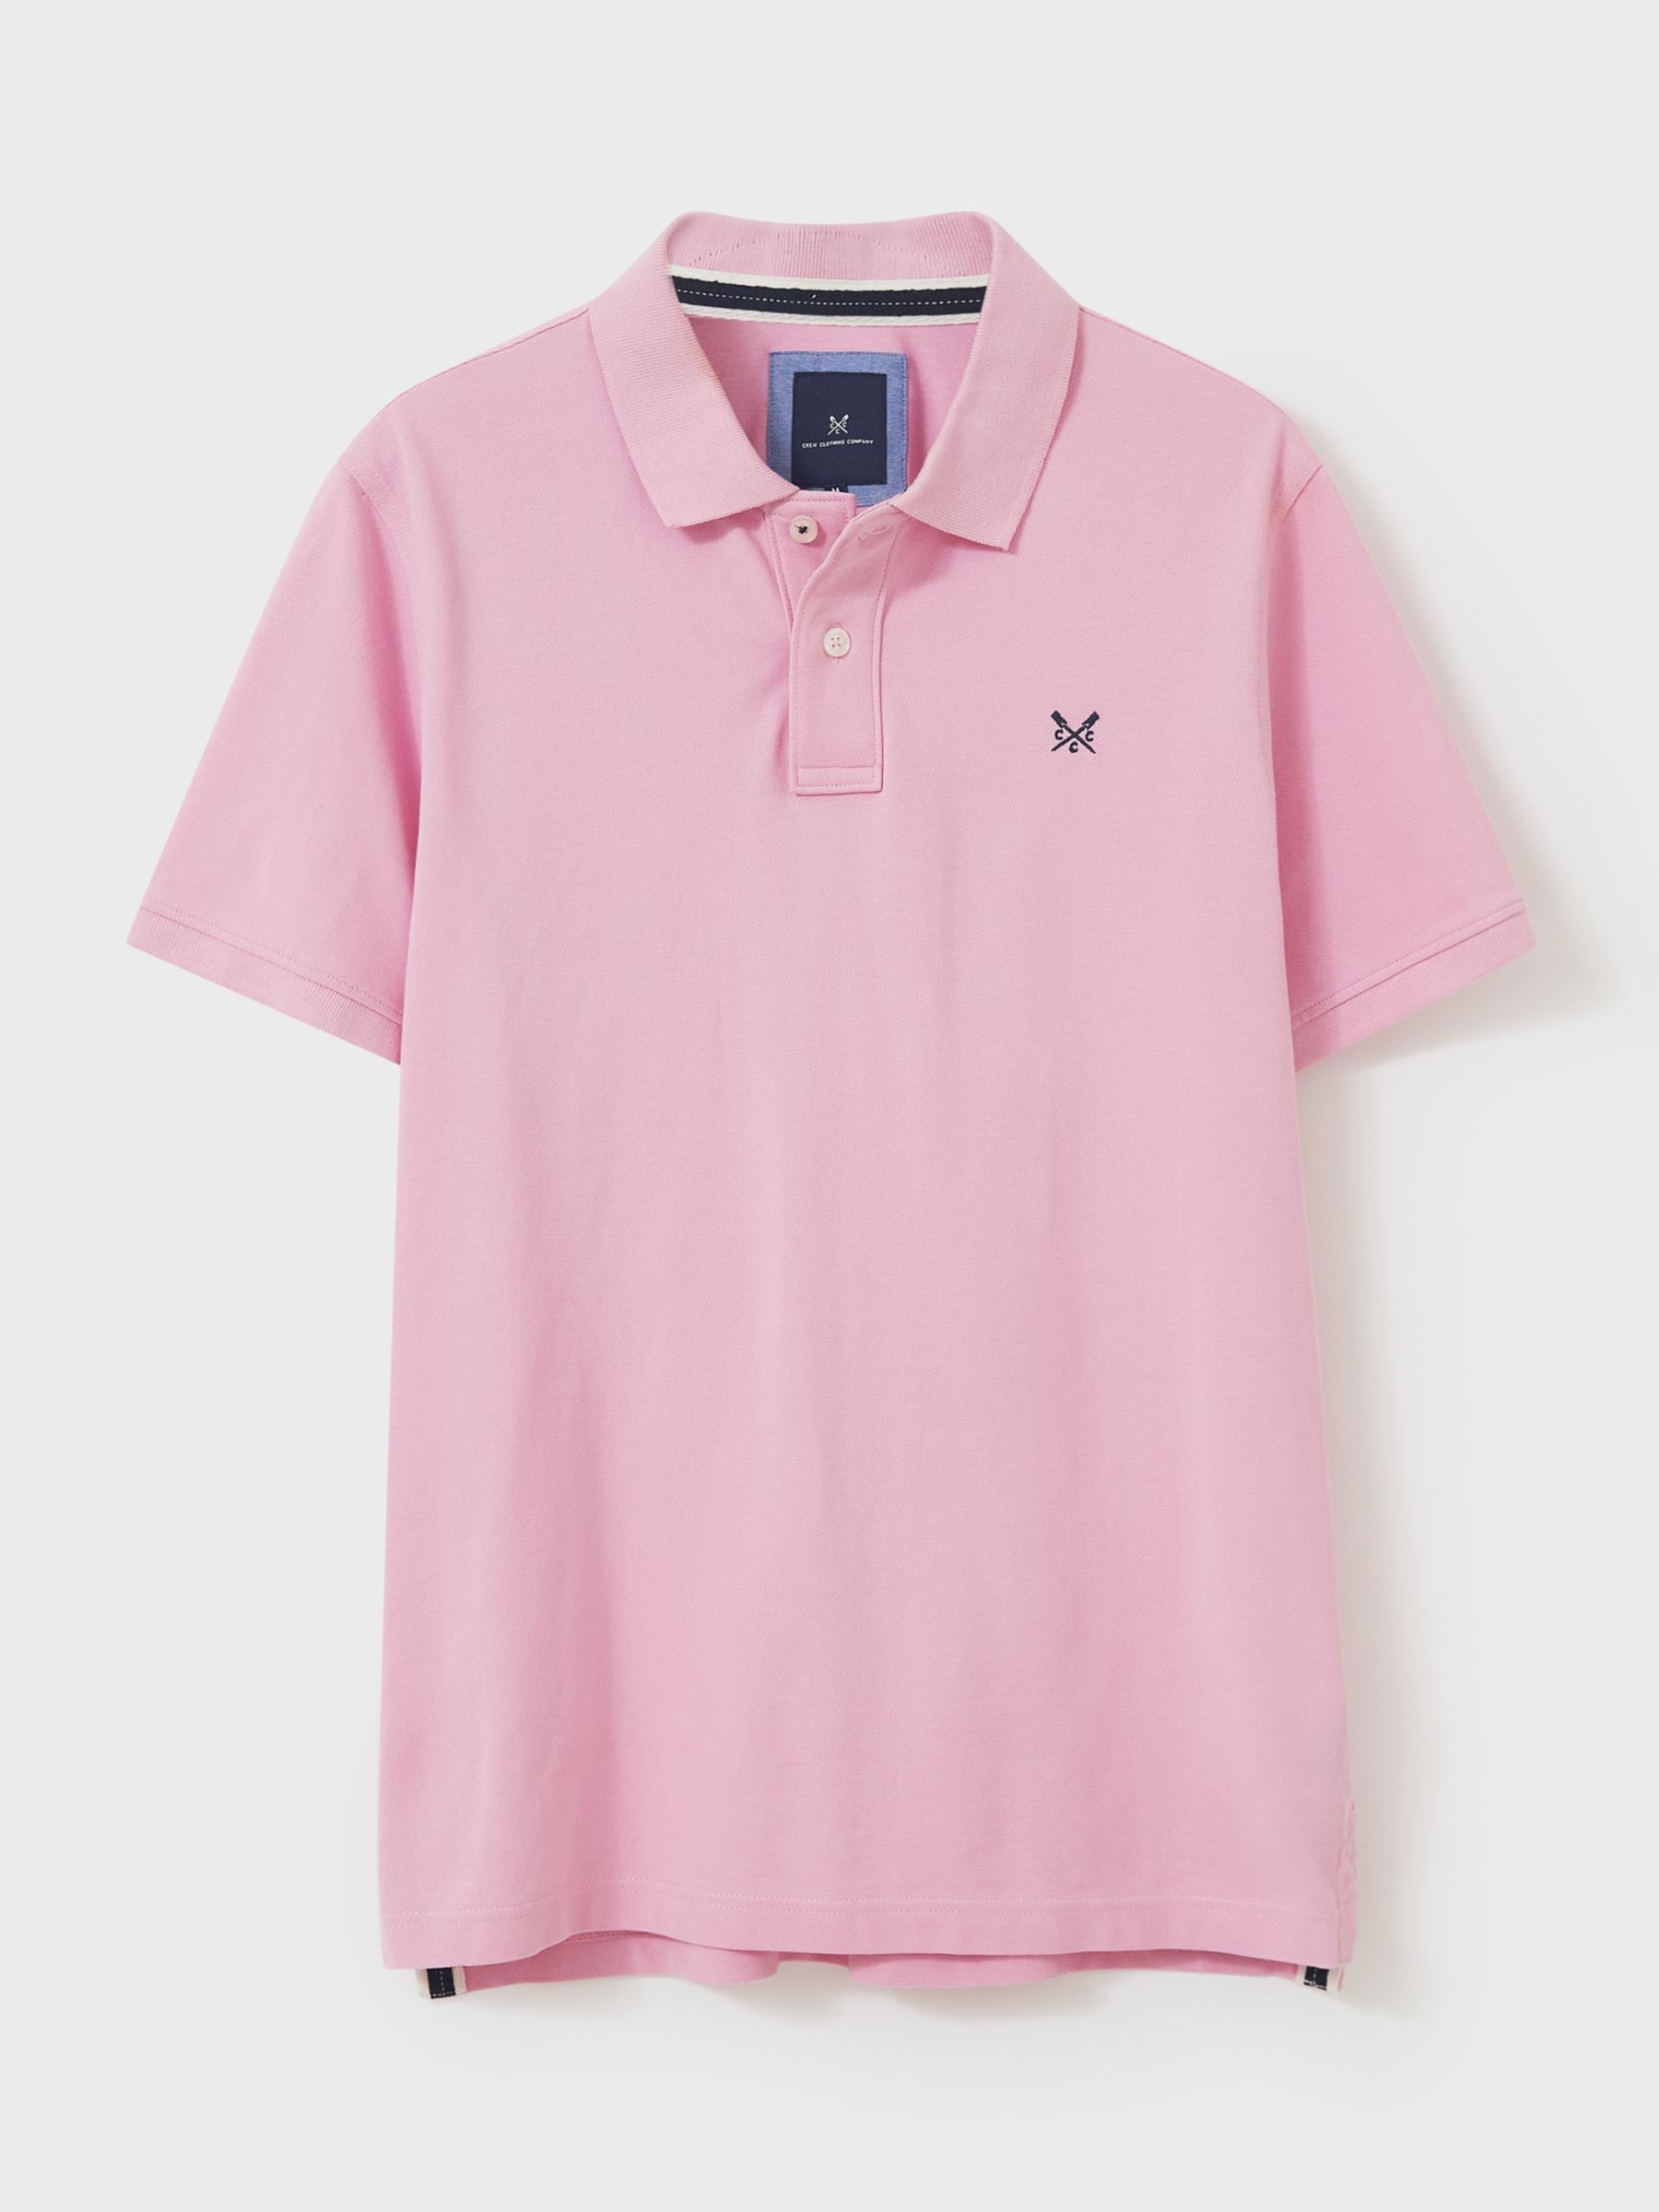 Crew Clothing Classic Pique Polo Shirt, Classic Pink at John Lewis ...